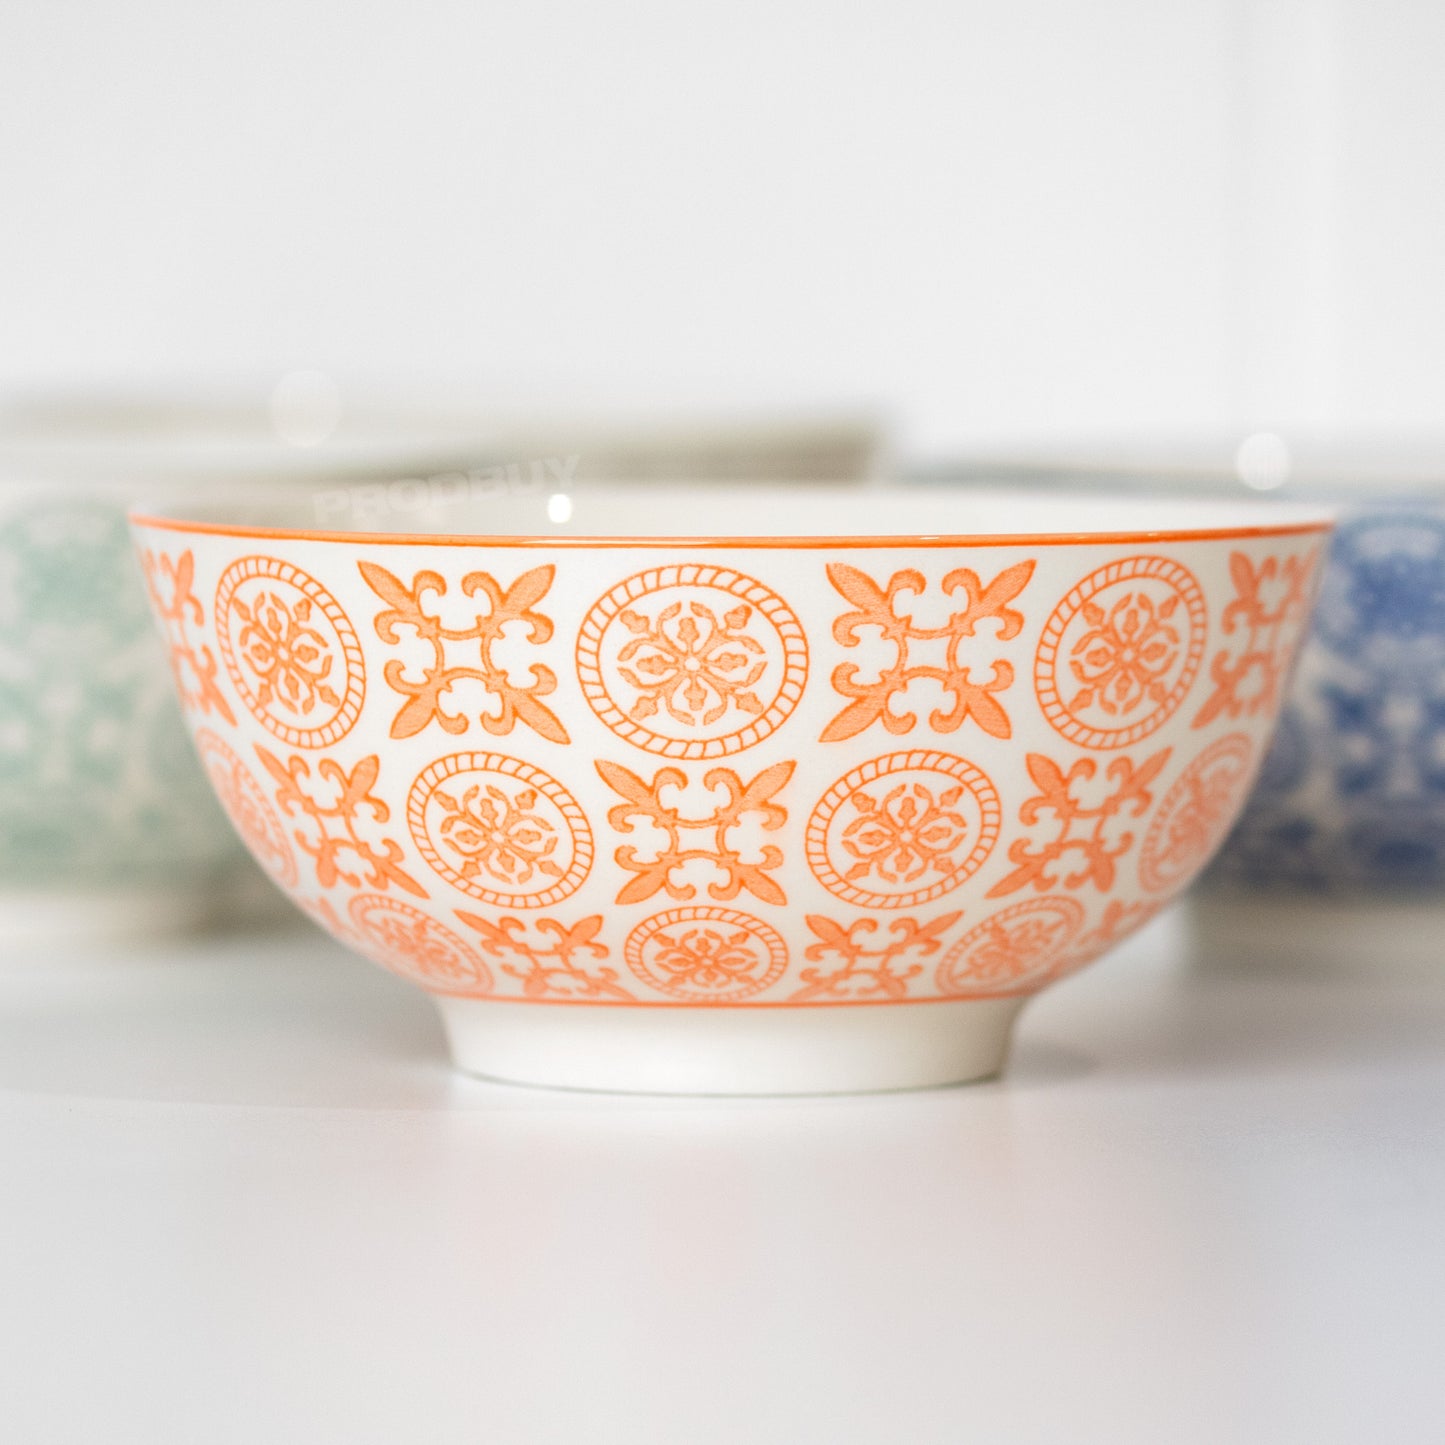 Set of 4 Ceramic Bowls with Vintage Style Pattern